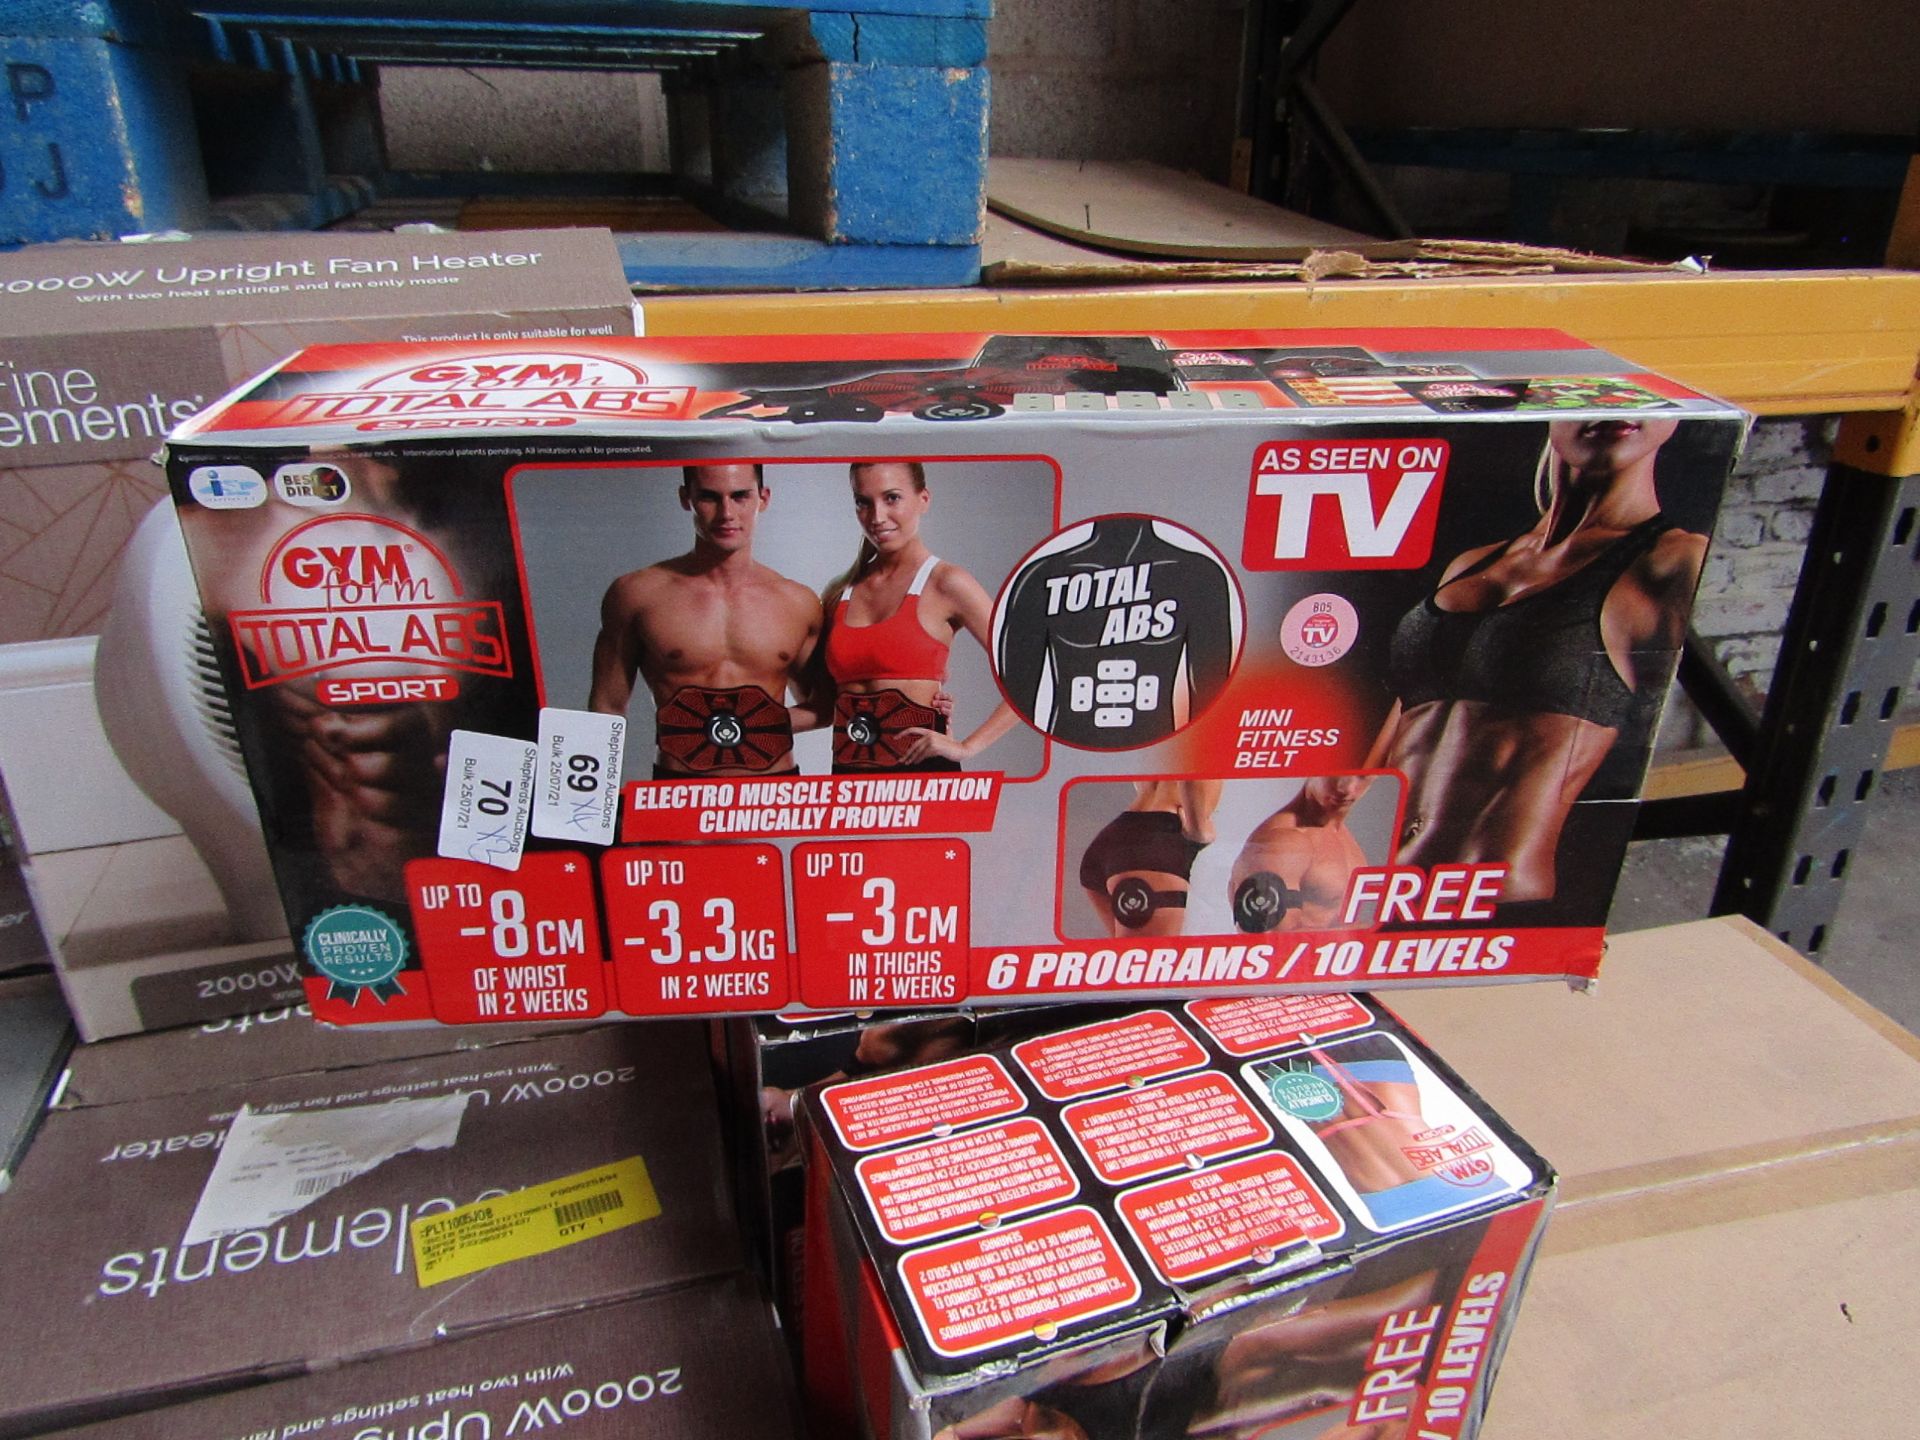 | 4X | GYM FORM TOTAL ABS SPORT | UNCHECKED AND BOXED | NO ONLINE RESALE | SKU - | TOTAL œ49.99 |